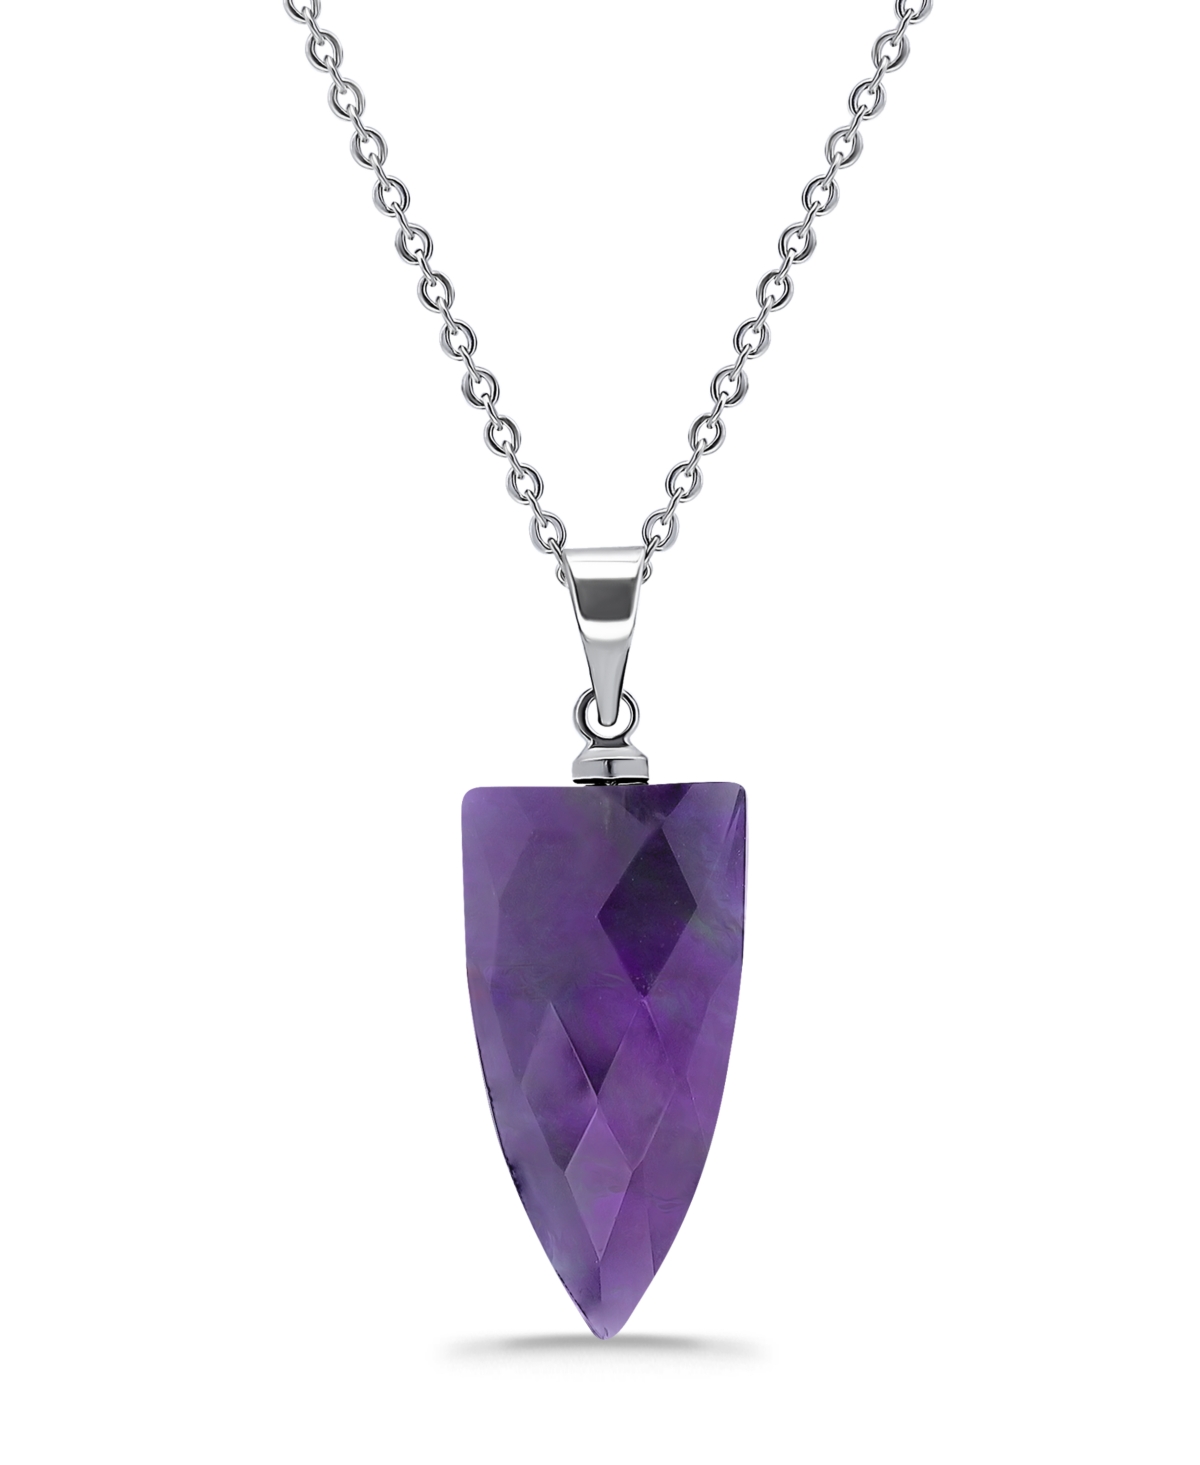 Macy's Silver Plated Multi Genuine Stone Pendant Necklace In Amethyst